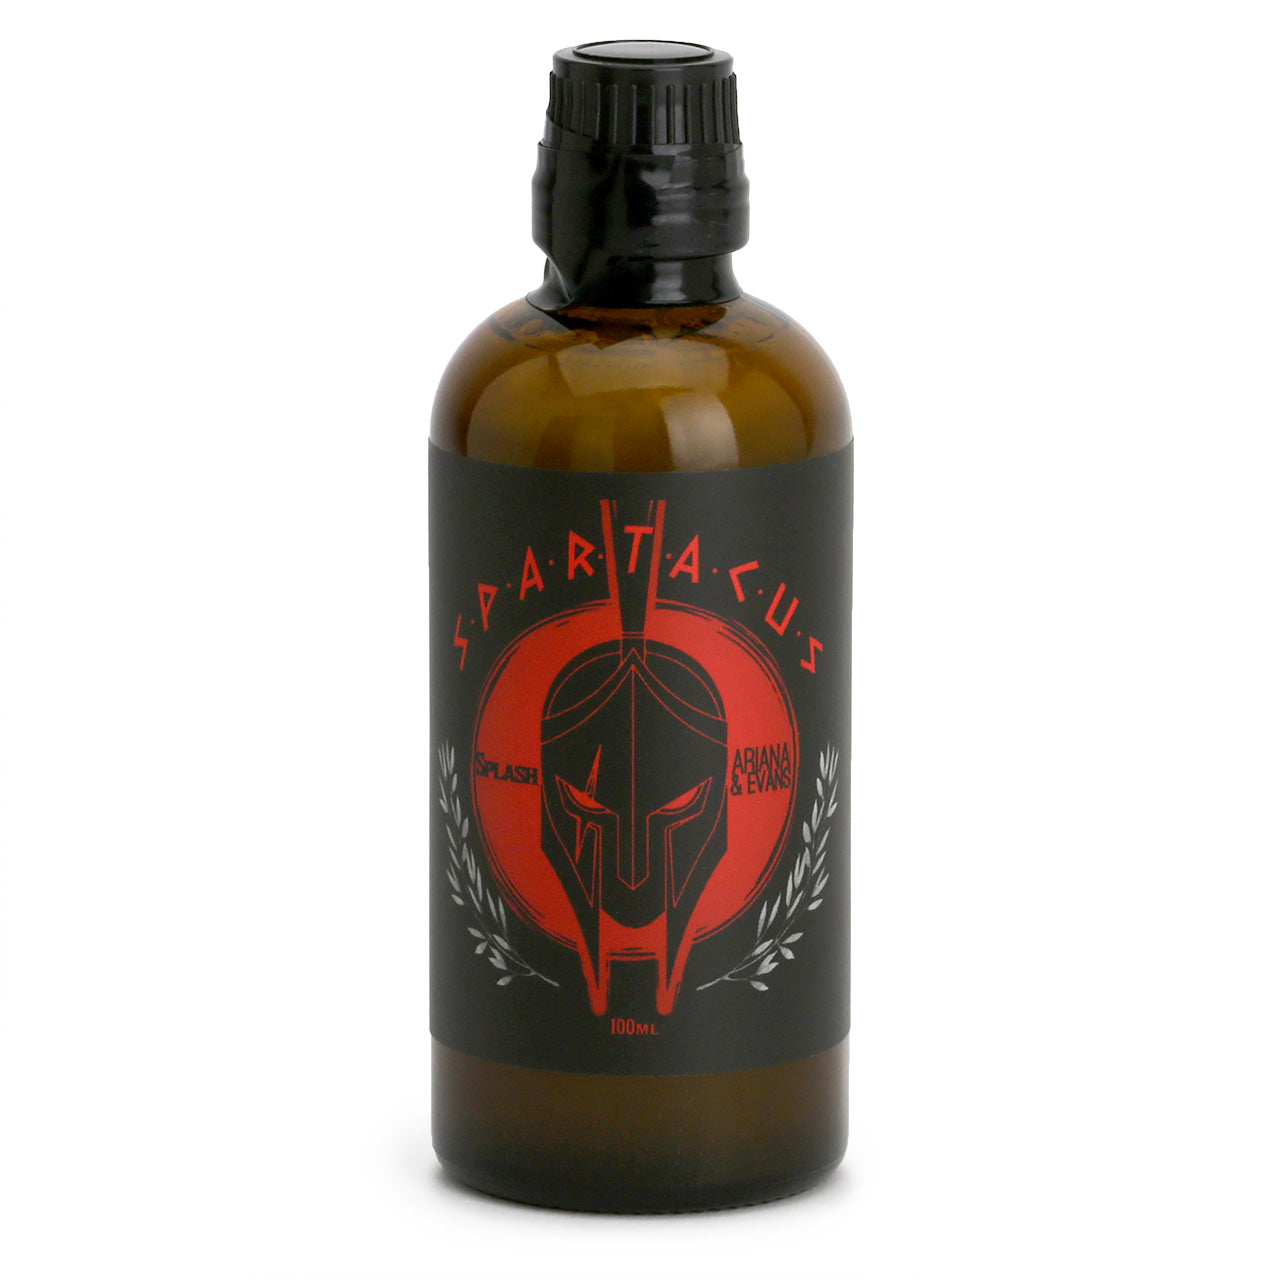 Spartacus Aftershave Splash Skin Food has a red and black label with a gladiator mask on an amber bottle